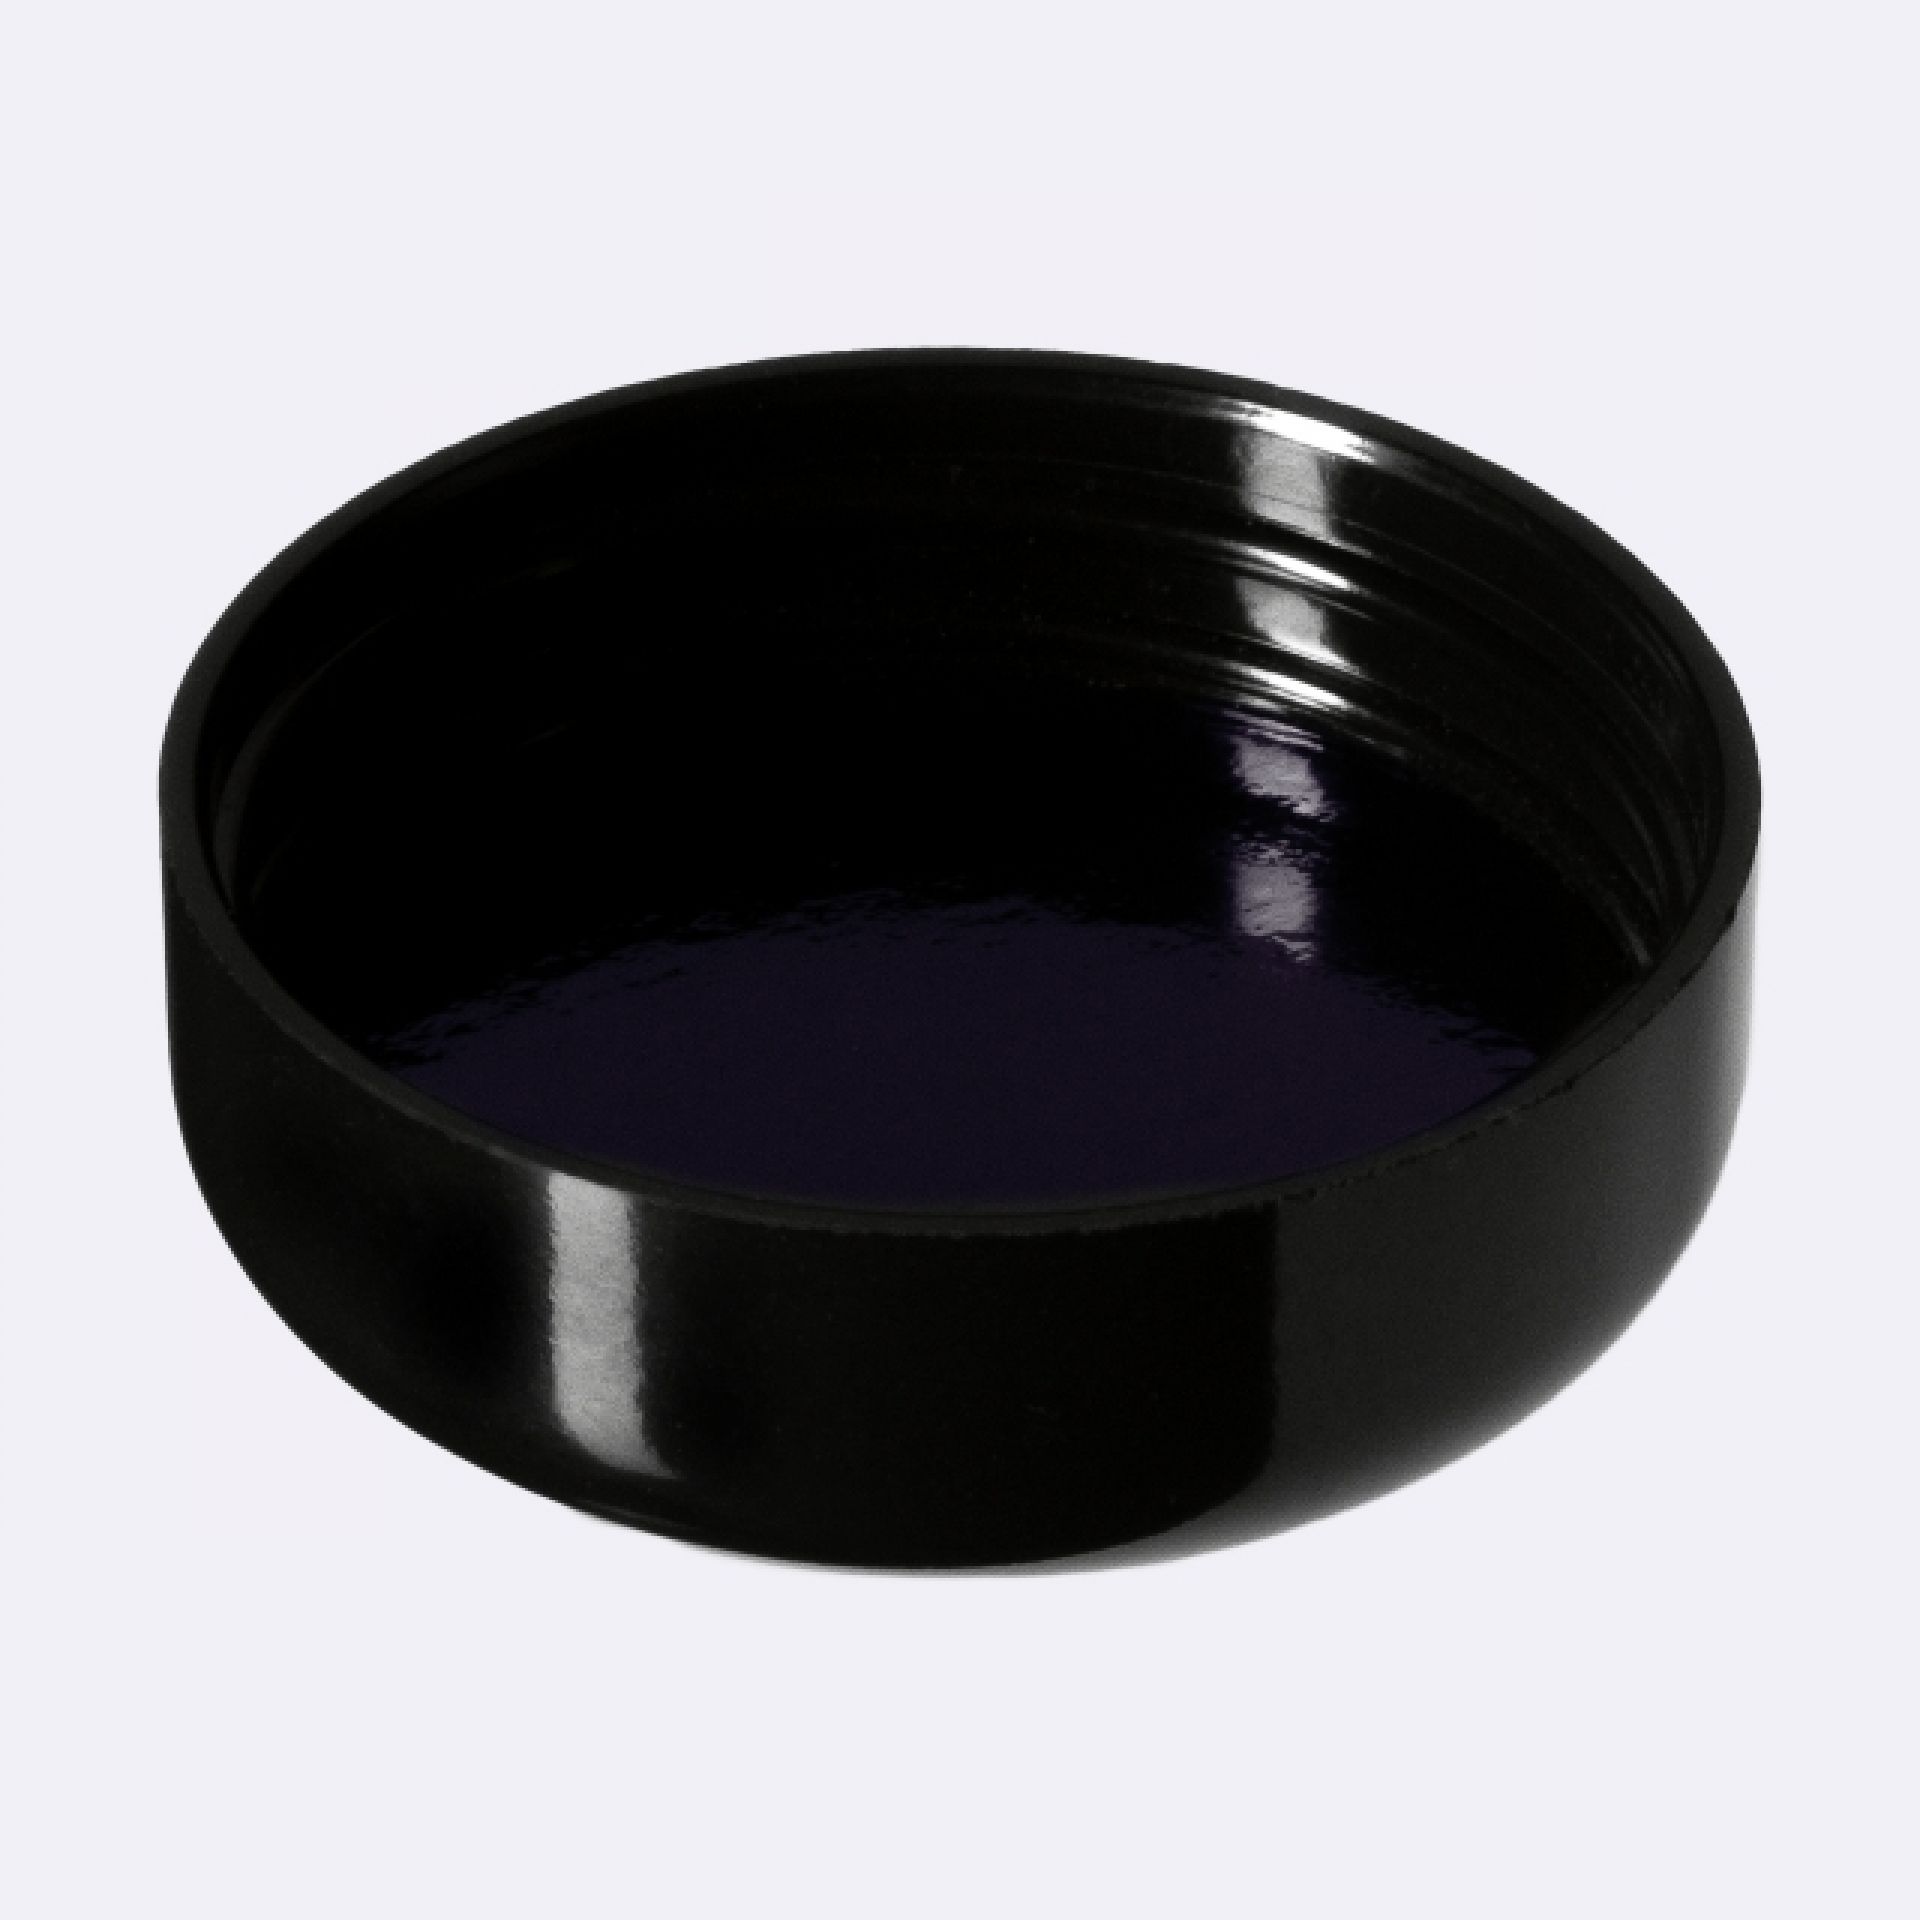 Lid Classic 38 special thread, UREA, black, glossy finish, violet Phan inlay (Ceres 15)